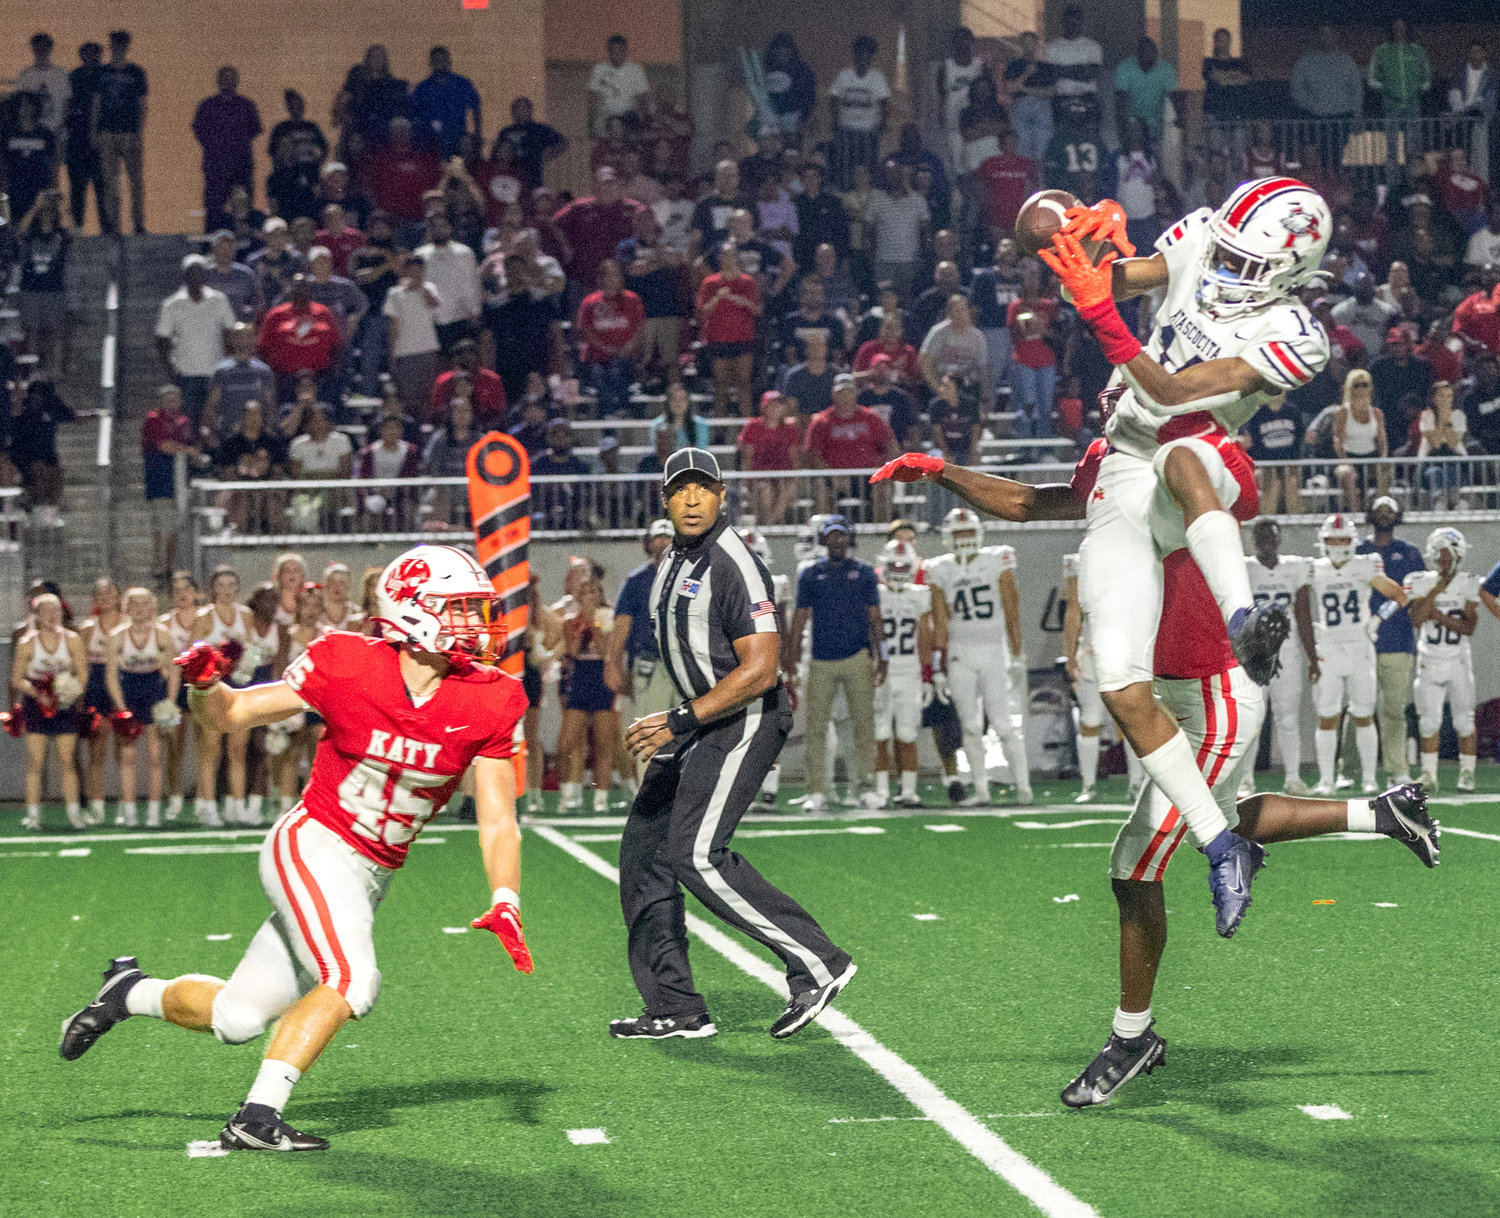 Katy’s Johnathan Hall breaks up a pass attempt to an Atascocita receiver during Friday’s game between Katy and Atascocita at Legacy Stadium.